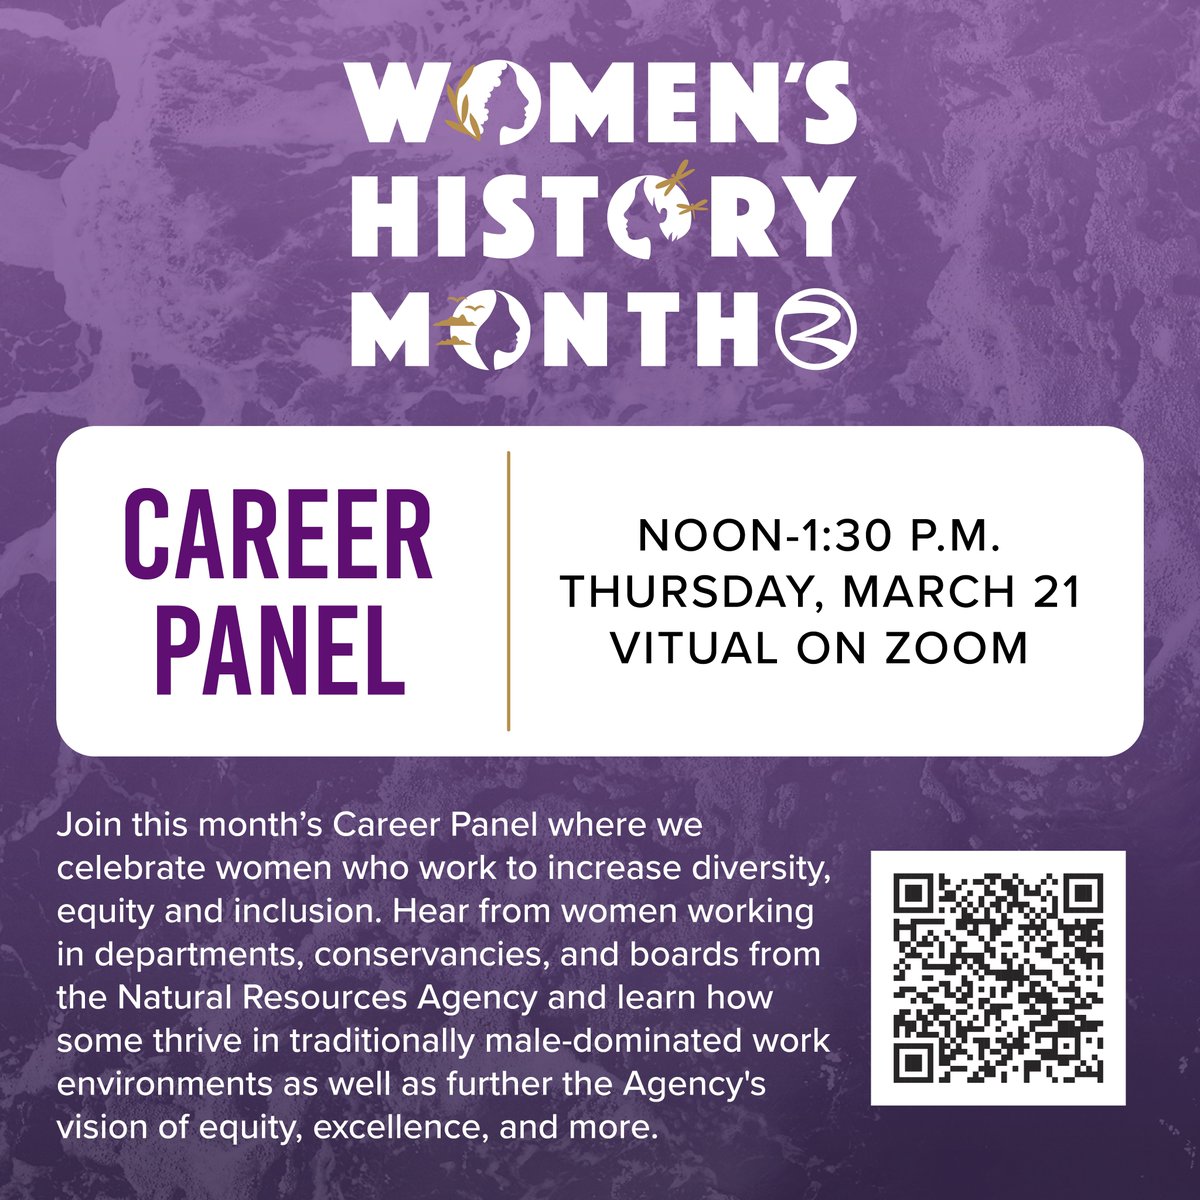 Join us this Thur at noon for a #WomenHistoryMonth career panel to hear from CNRA women leaders on what it takes to thrive in traditionally male-dominated work environments as well as further the Agency's vision of equity, excellence, and more. Register➡️energy.zoom.us/webinar/regist…